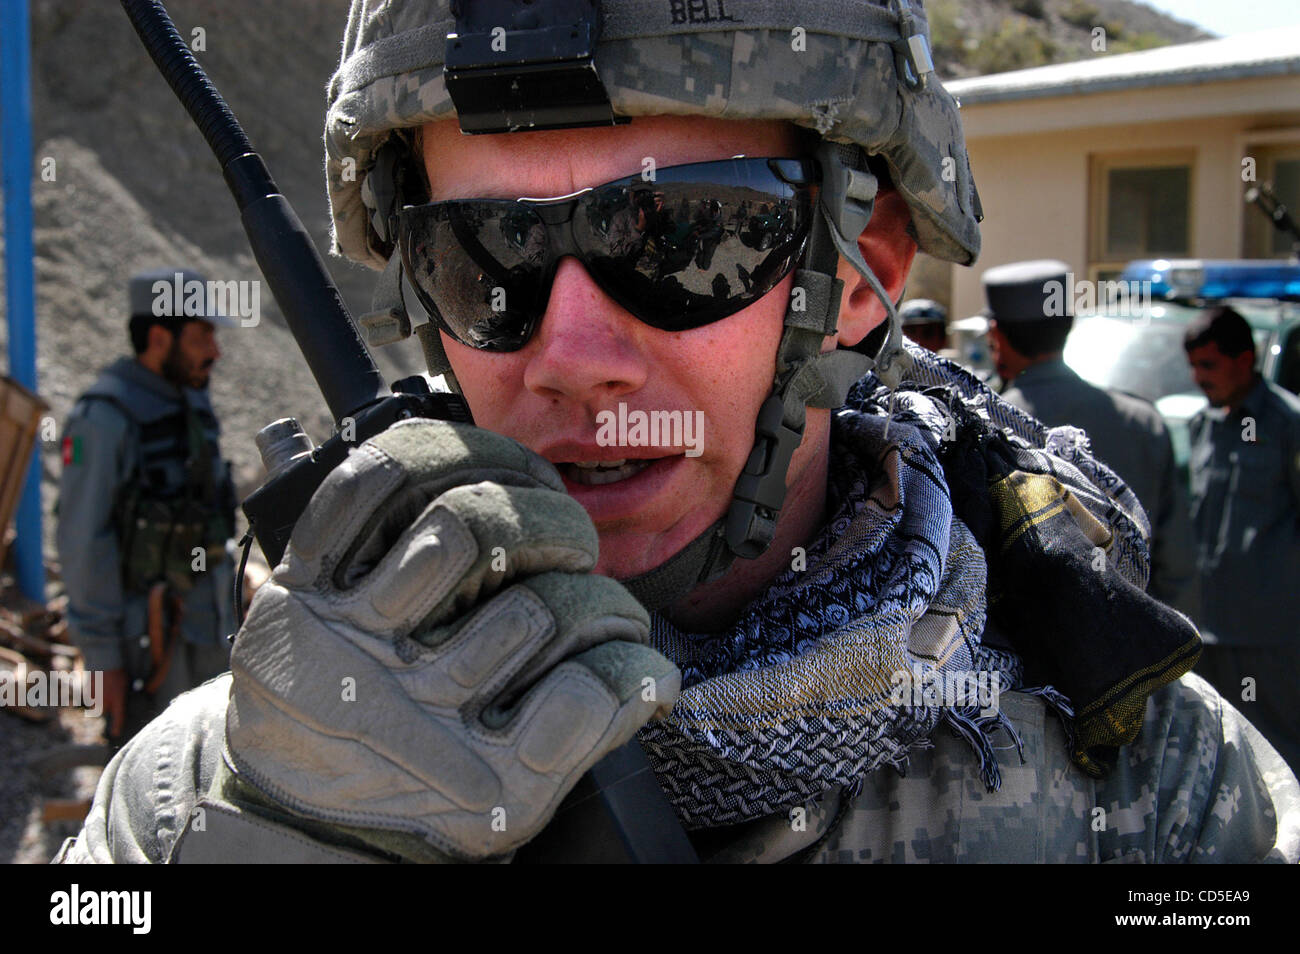 Apr 29, 2008 - Paktya Province, Afghanistan - LIEUTENANT KEVIN BELL of the 1-61 Cavalry, 4th Brigade Combat Team, 101st Airborne, keeps in radio contact with his platoon securing the exterior of the Afghan police station while meeting the new Afghan National Civil Order Police (ANCOP) district comma Stock Photo